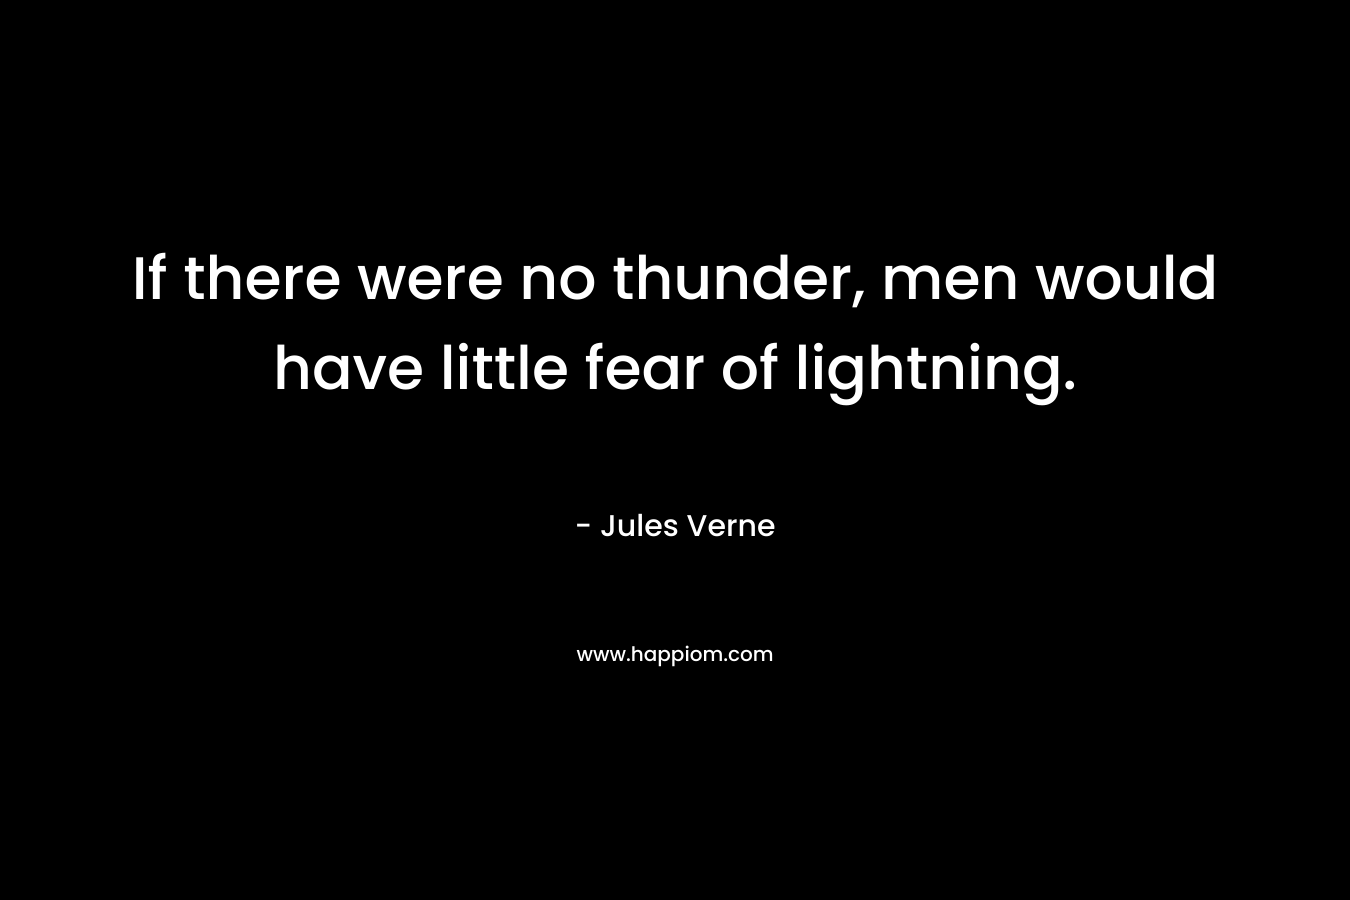 If there were no thunder, men would have little fear of lightning. – Jules Verne